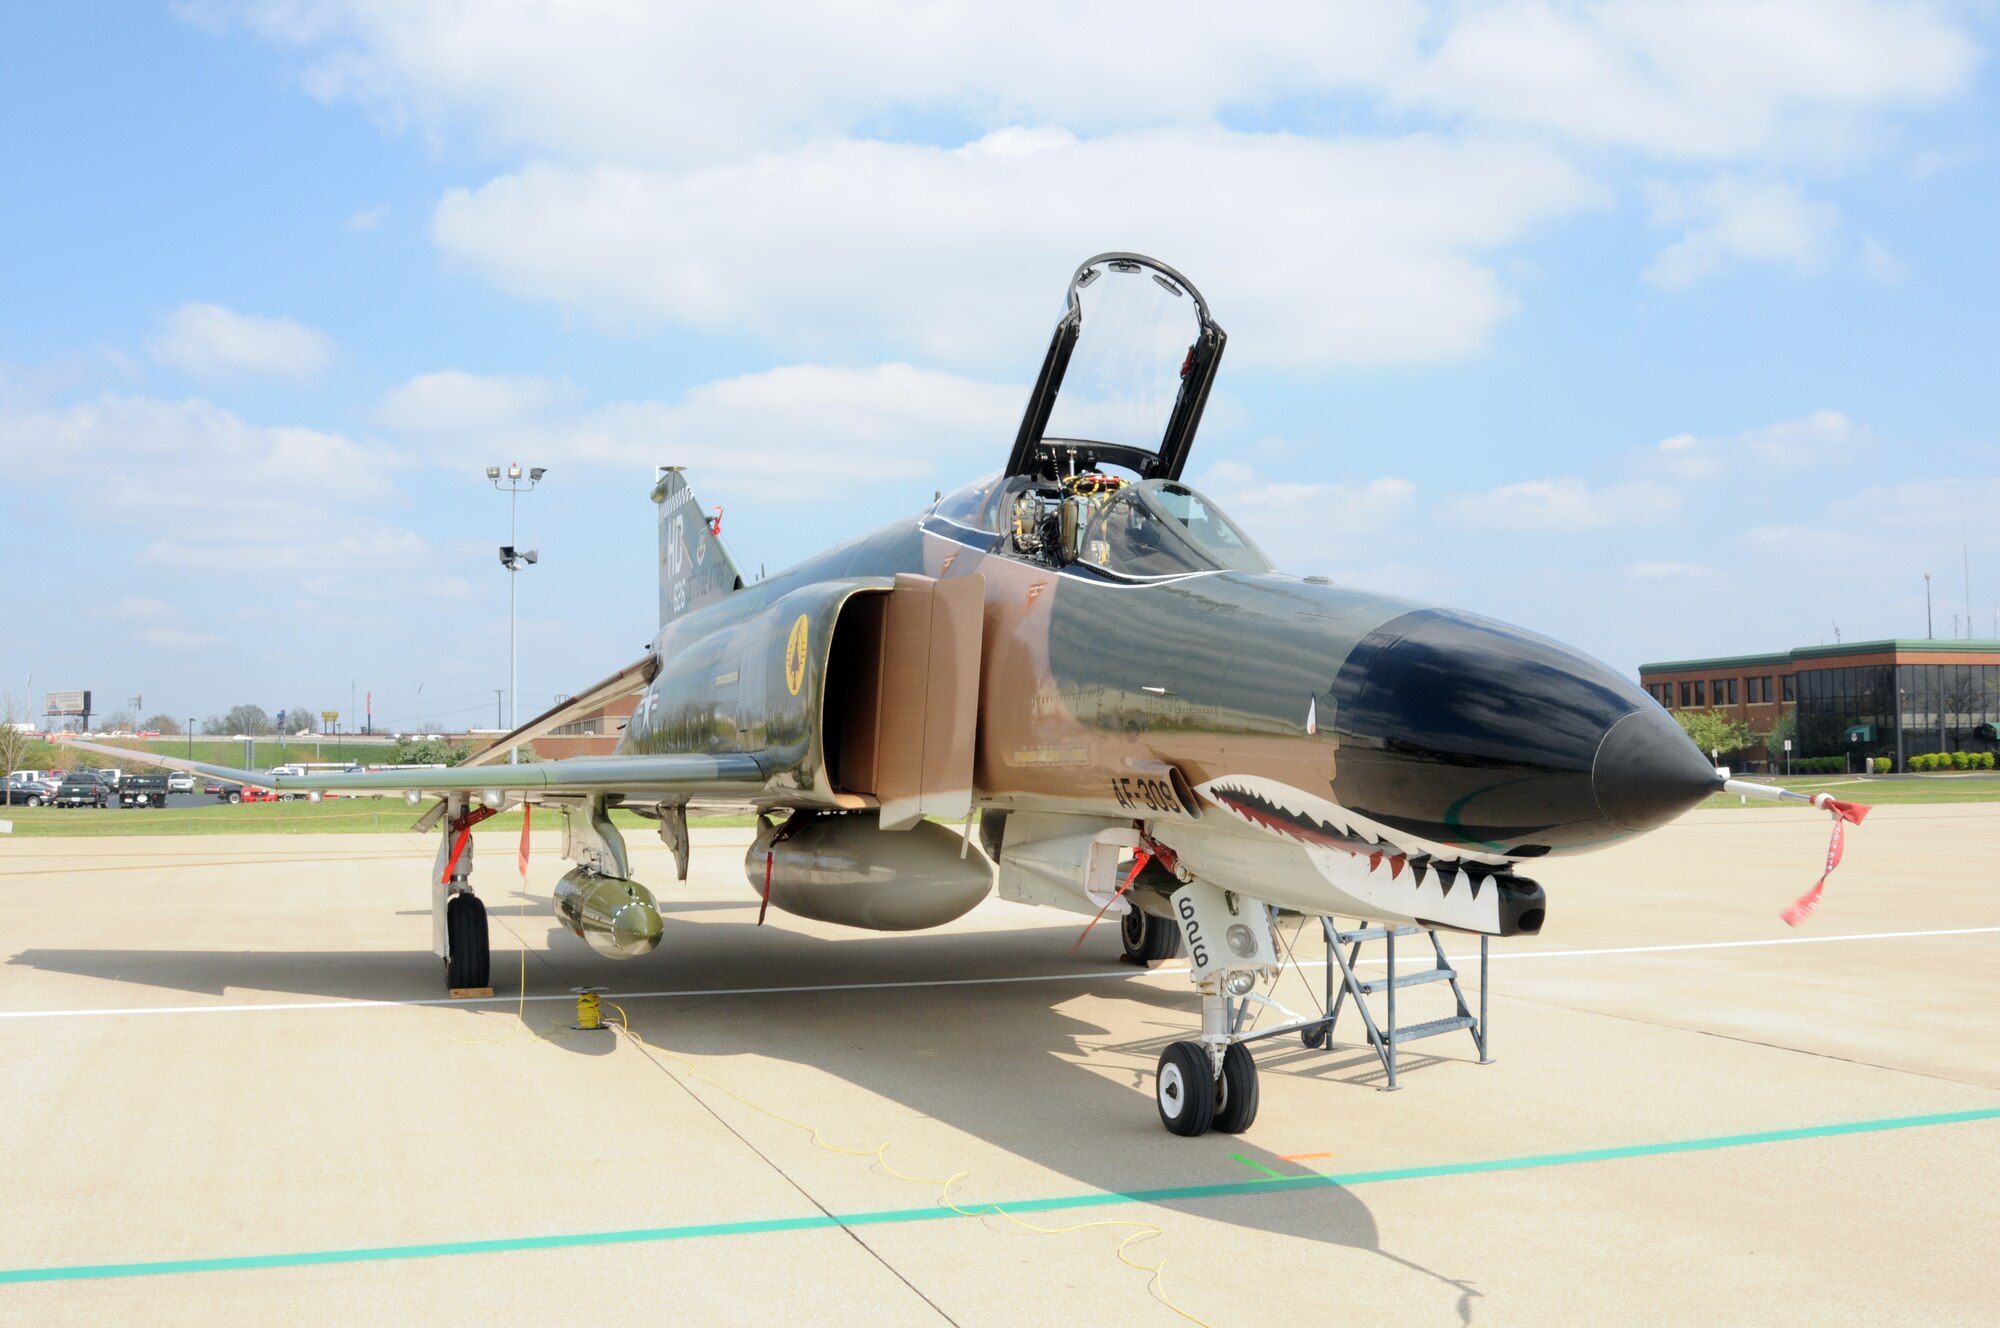 An F-4 Phantom sits on the flightline at the Kentucky Air National Guard Base on April 16.  The F-4 demo team, based at Holloman Air Force Base, N.M., will be participating in this weekend's Thunder Over Louisville air show. (USAF photo by Tech. Sgt. Phil Speck.)